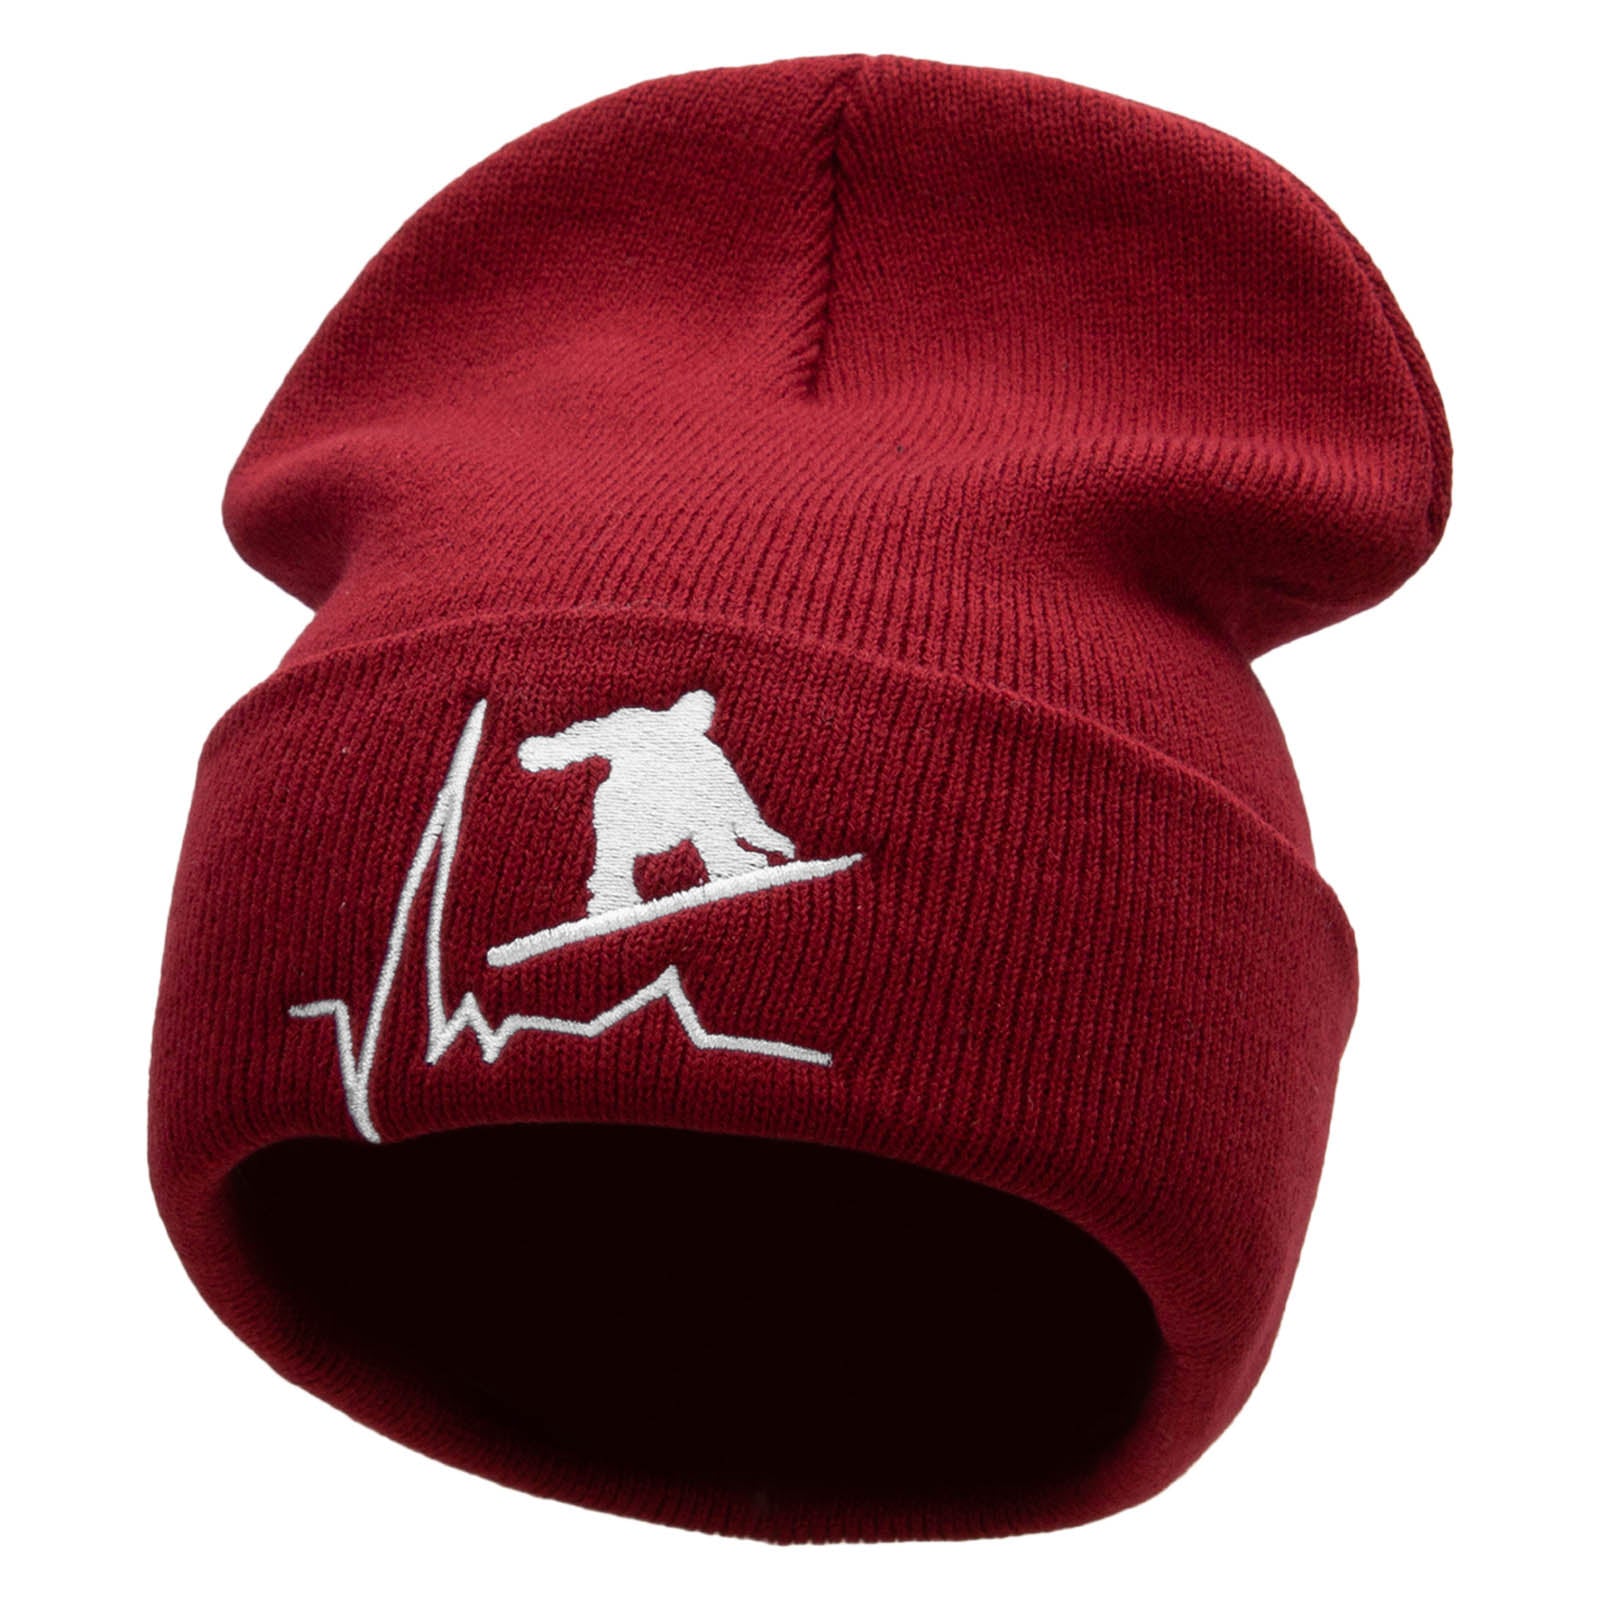 Snowboarding Life Embroidered 12 Inch Long Knitted Beanie - Maroon OSFM